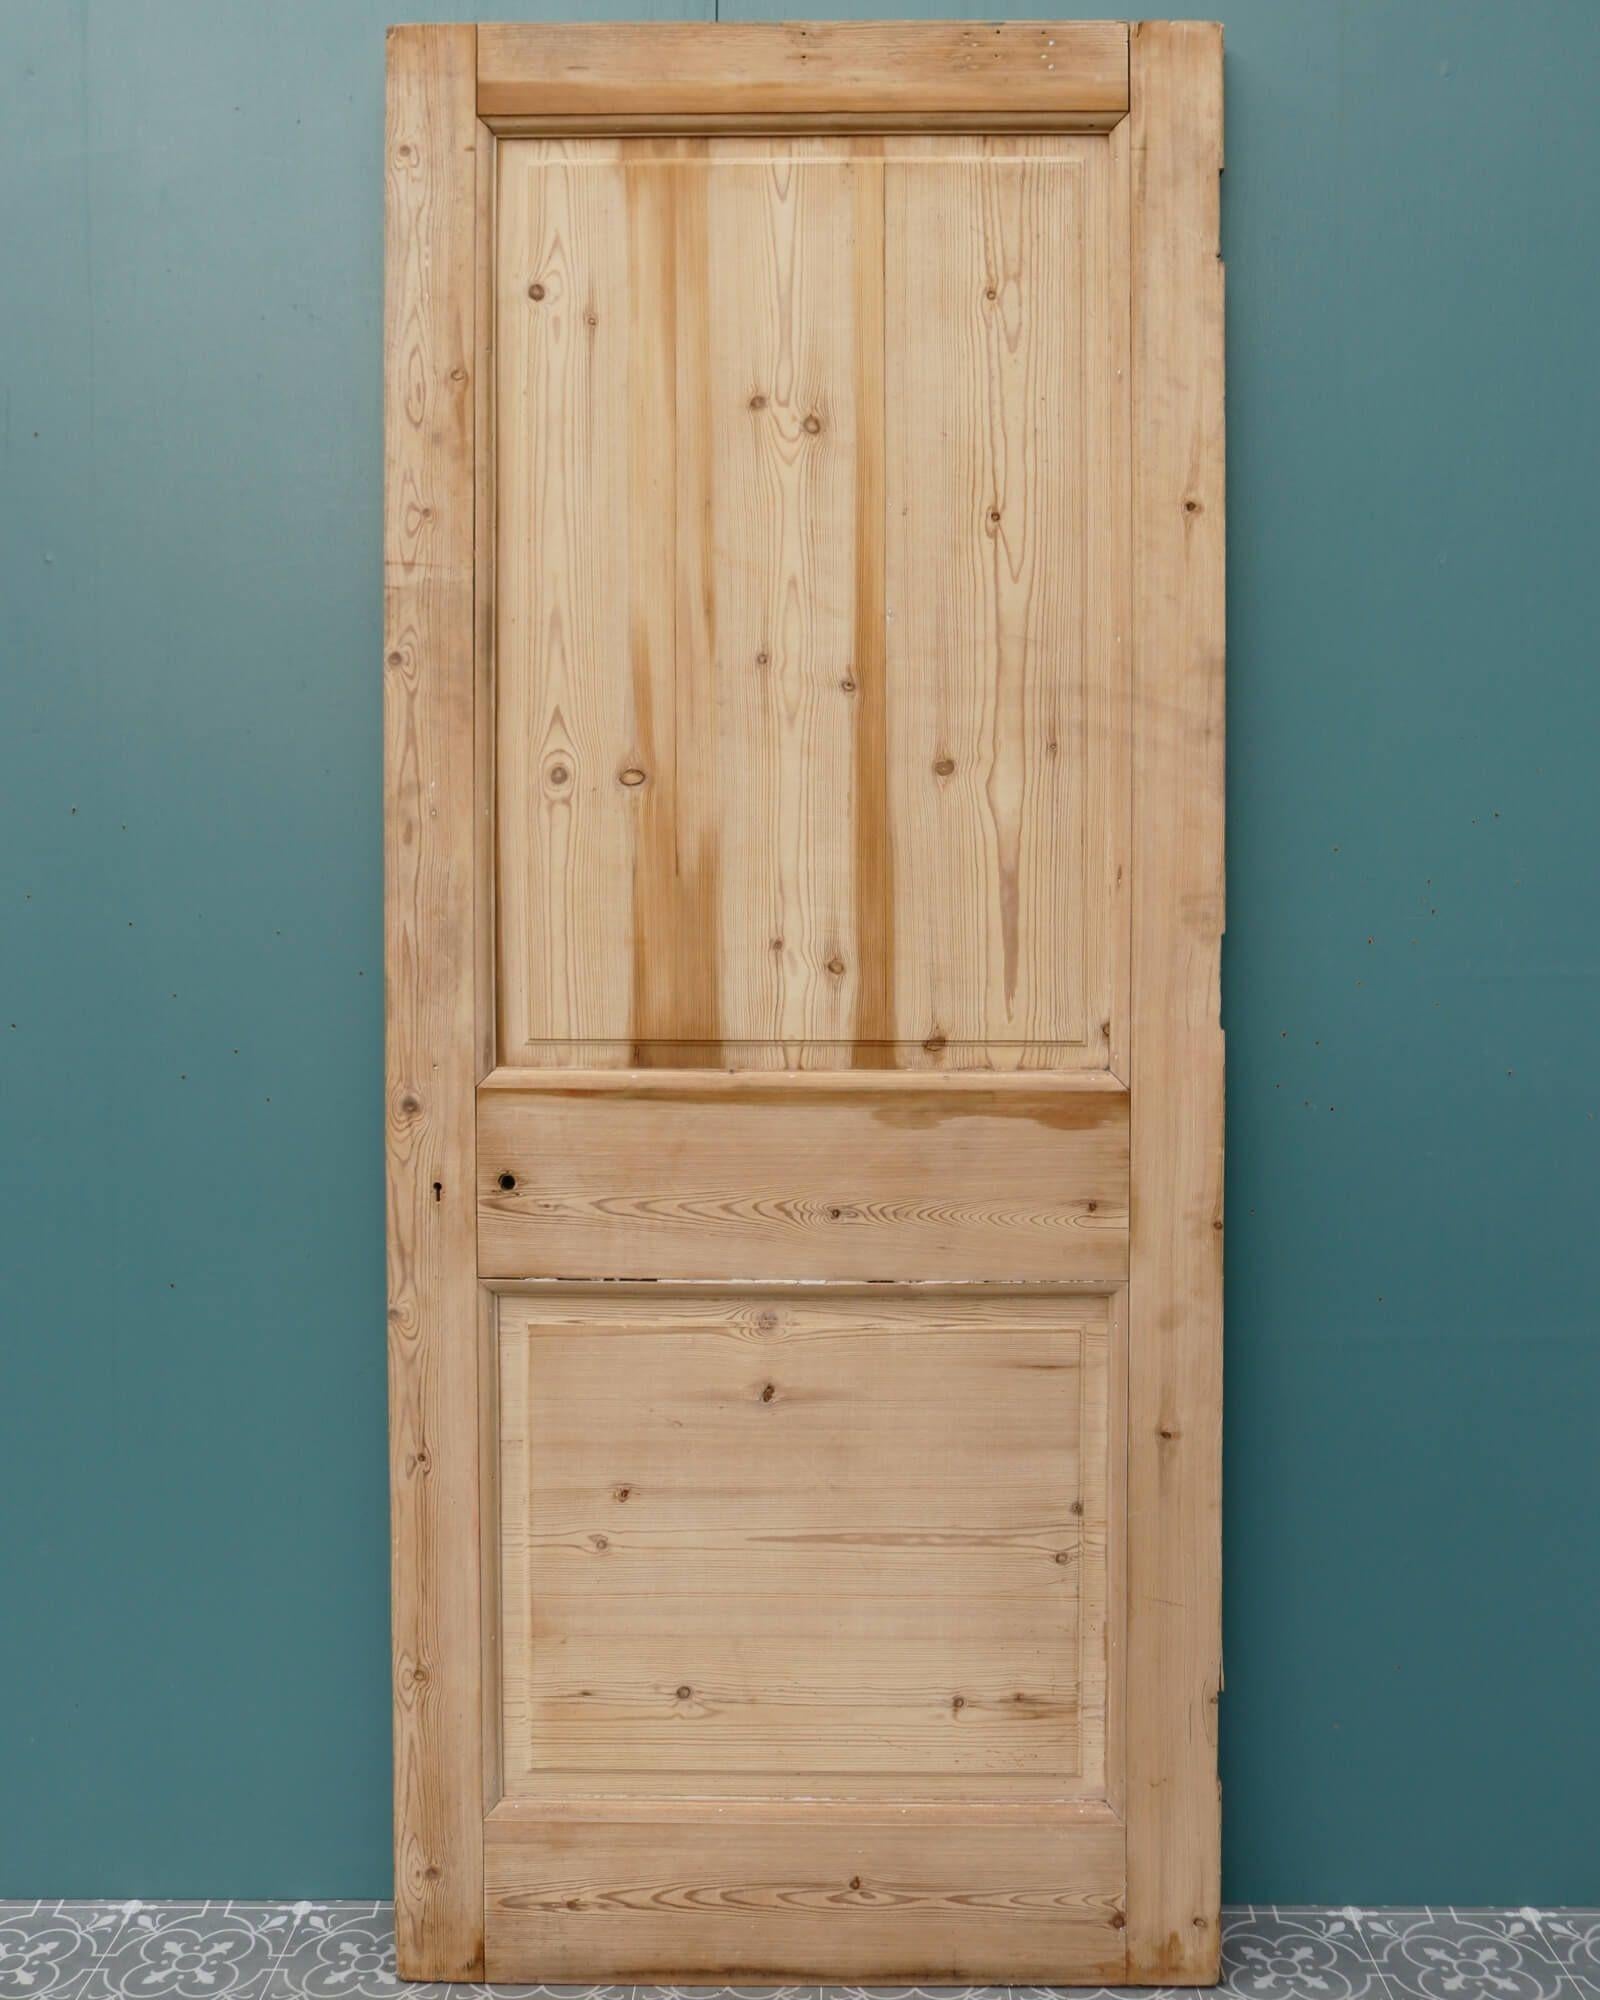 A smart antique 2-panel English pine door for internal use dating from the early 20th century. Made in pine, this Victorian style door features raised and fielded panels to one side and plain panels to the other. It is stripped and sanded, ready for